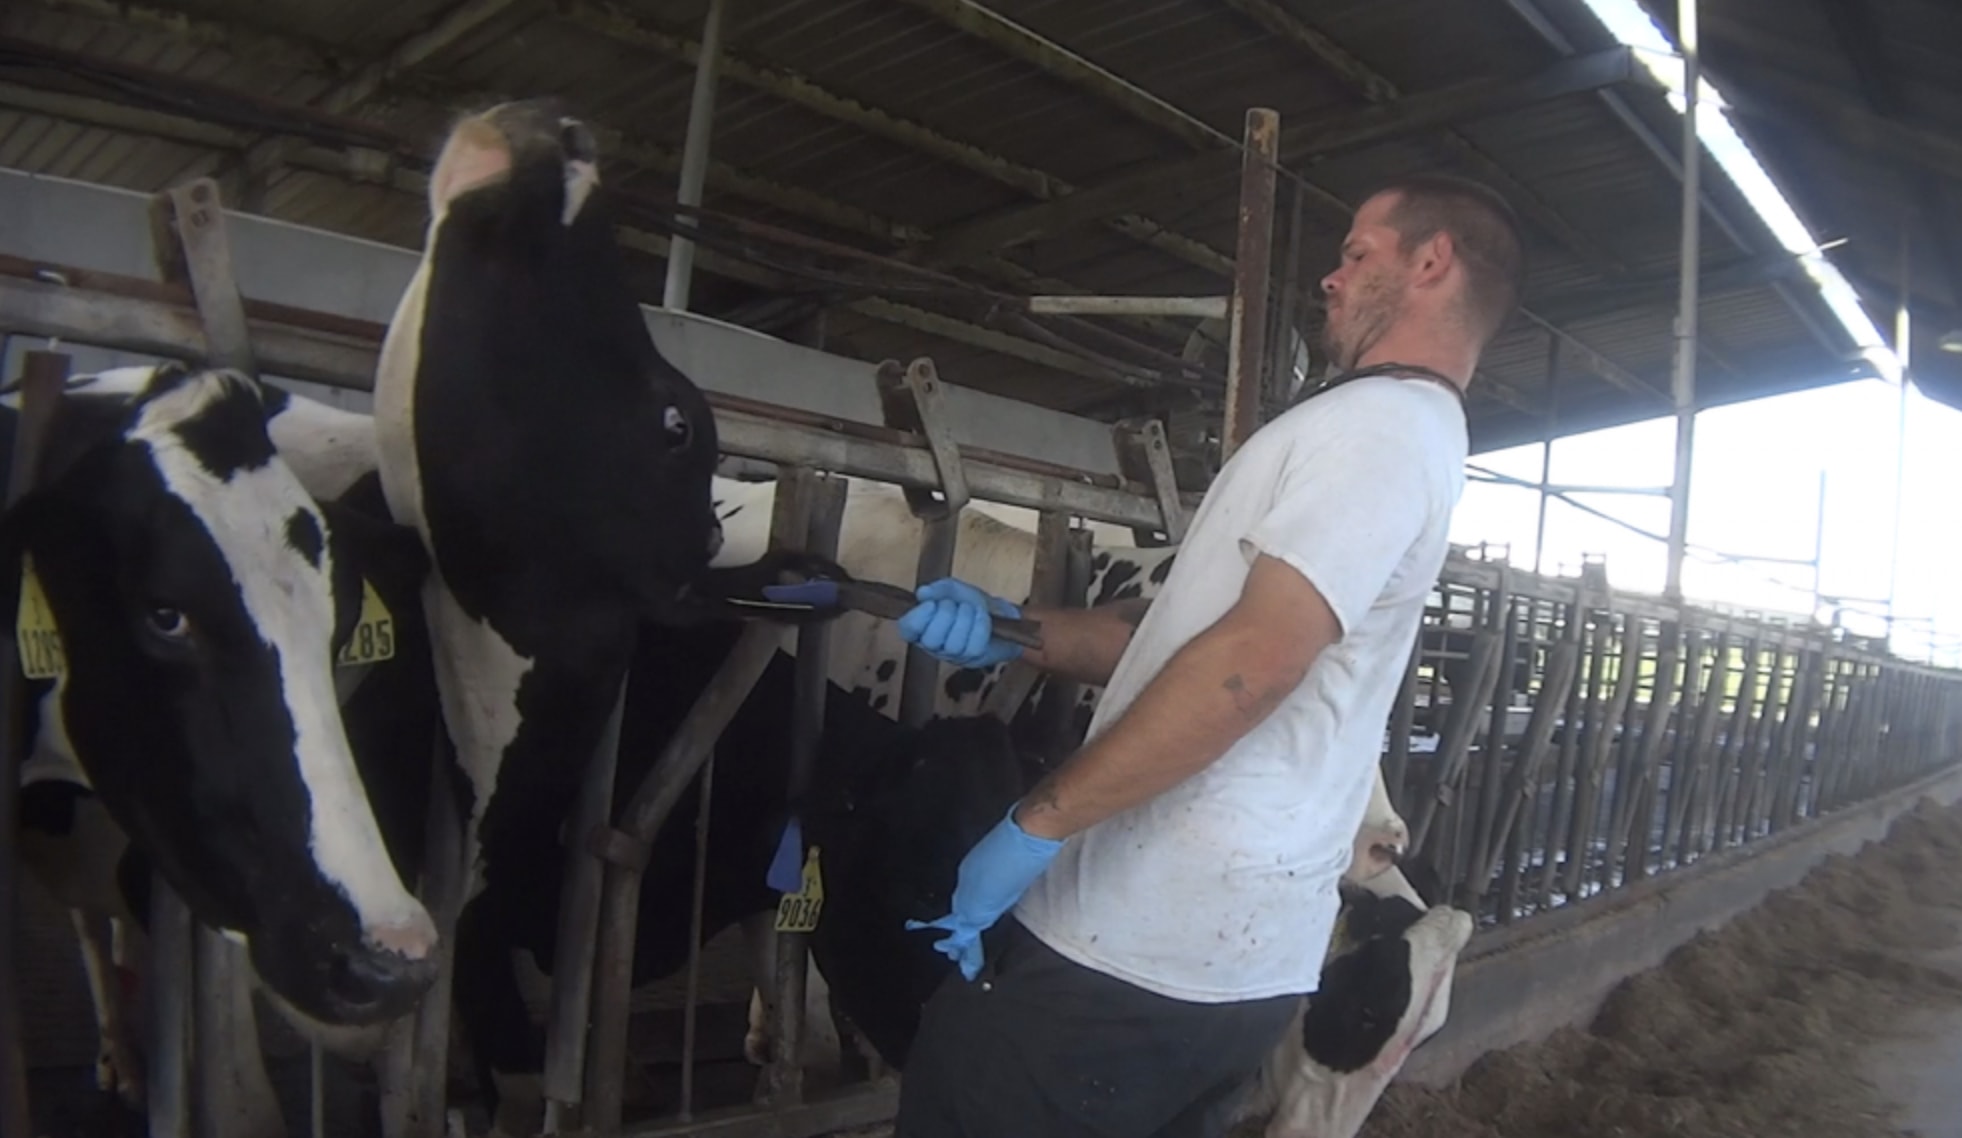 Dairy Farm Workers Found Guilty Of Animal Cruelty After 'Torturing' Cows